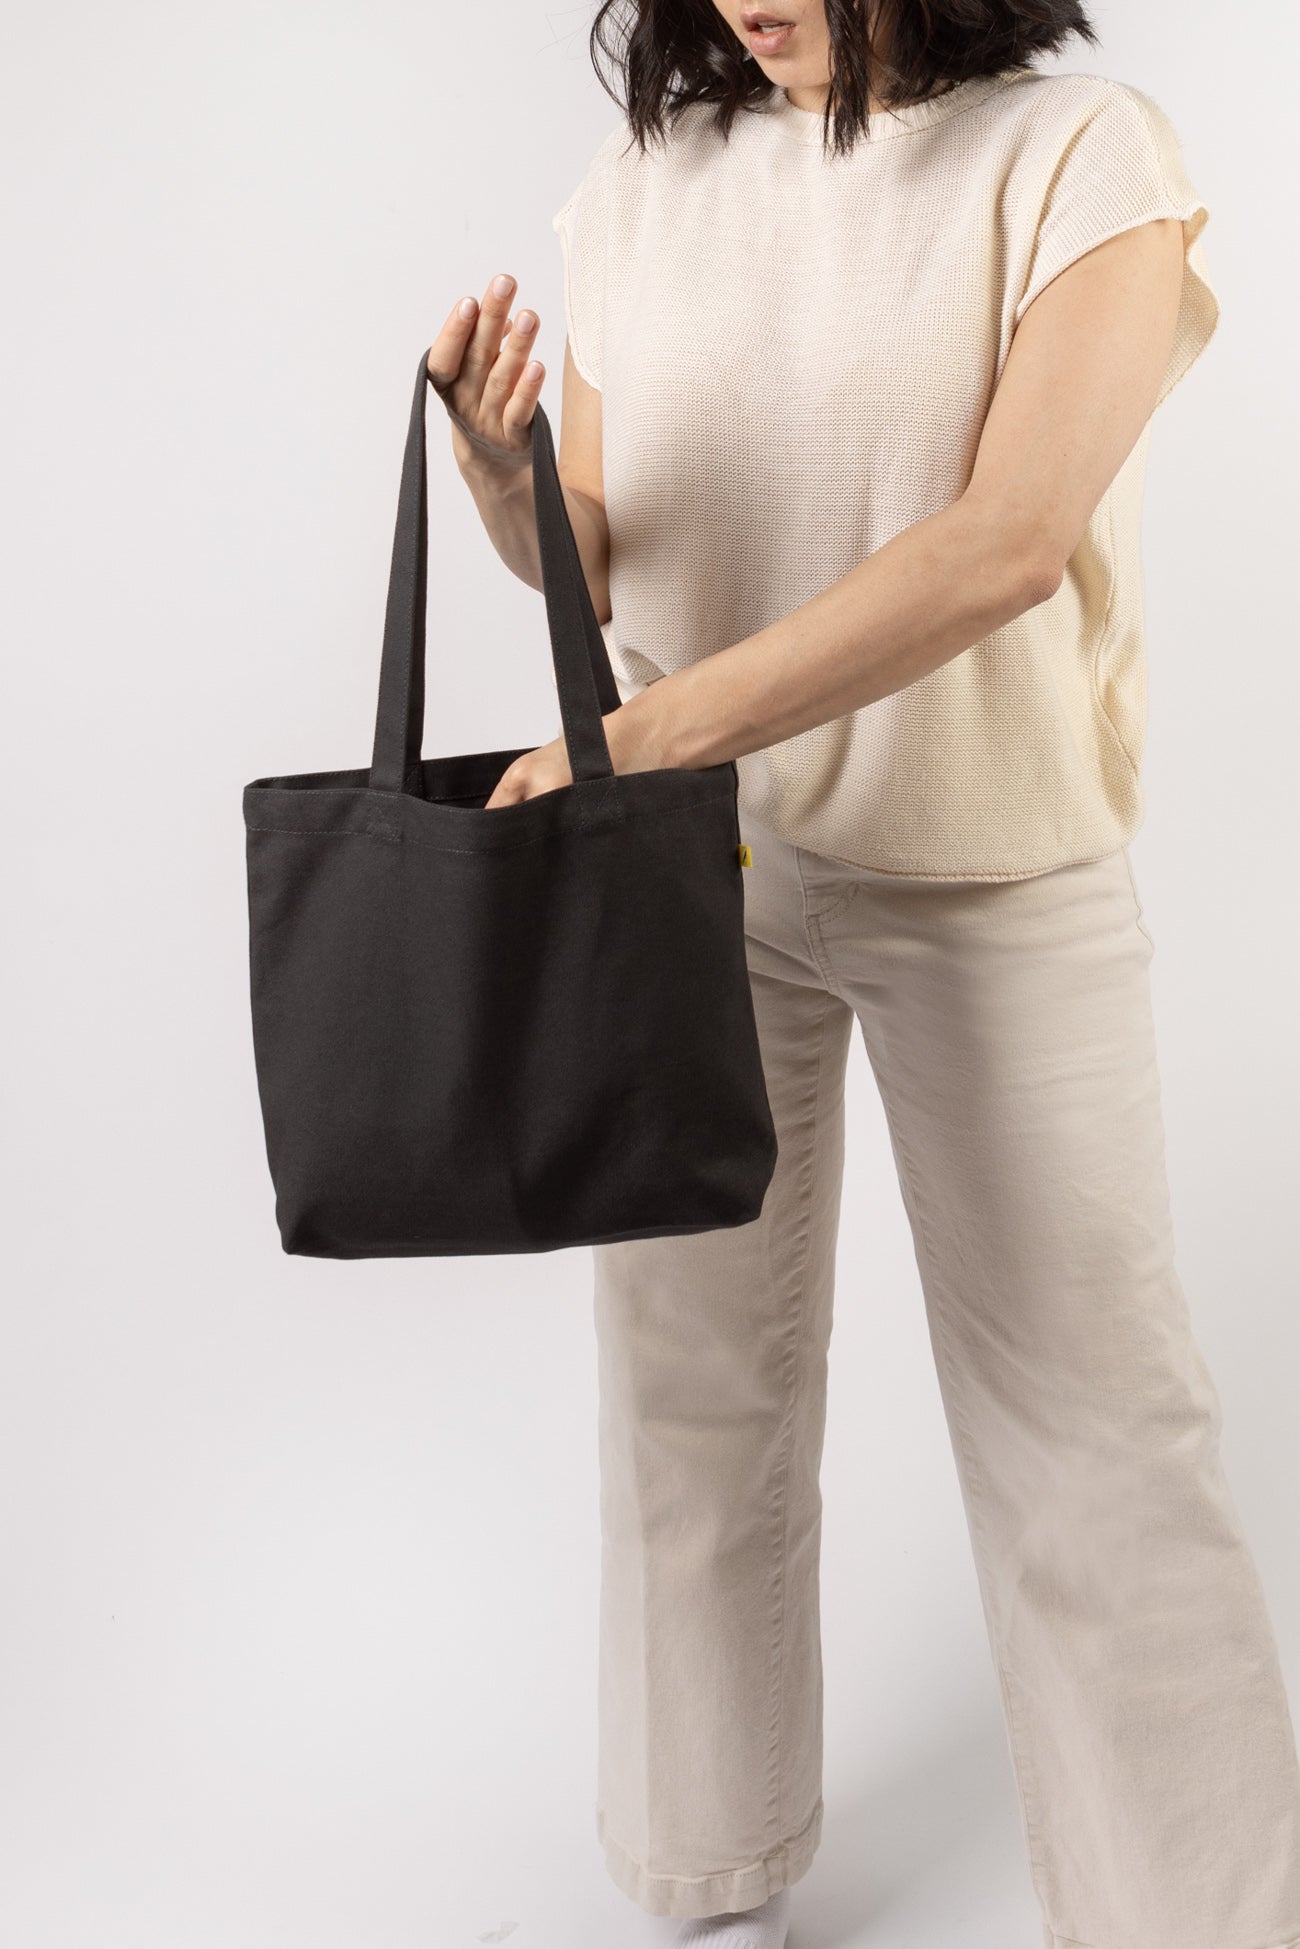 Baby Tote - Carbon